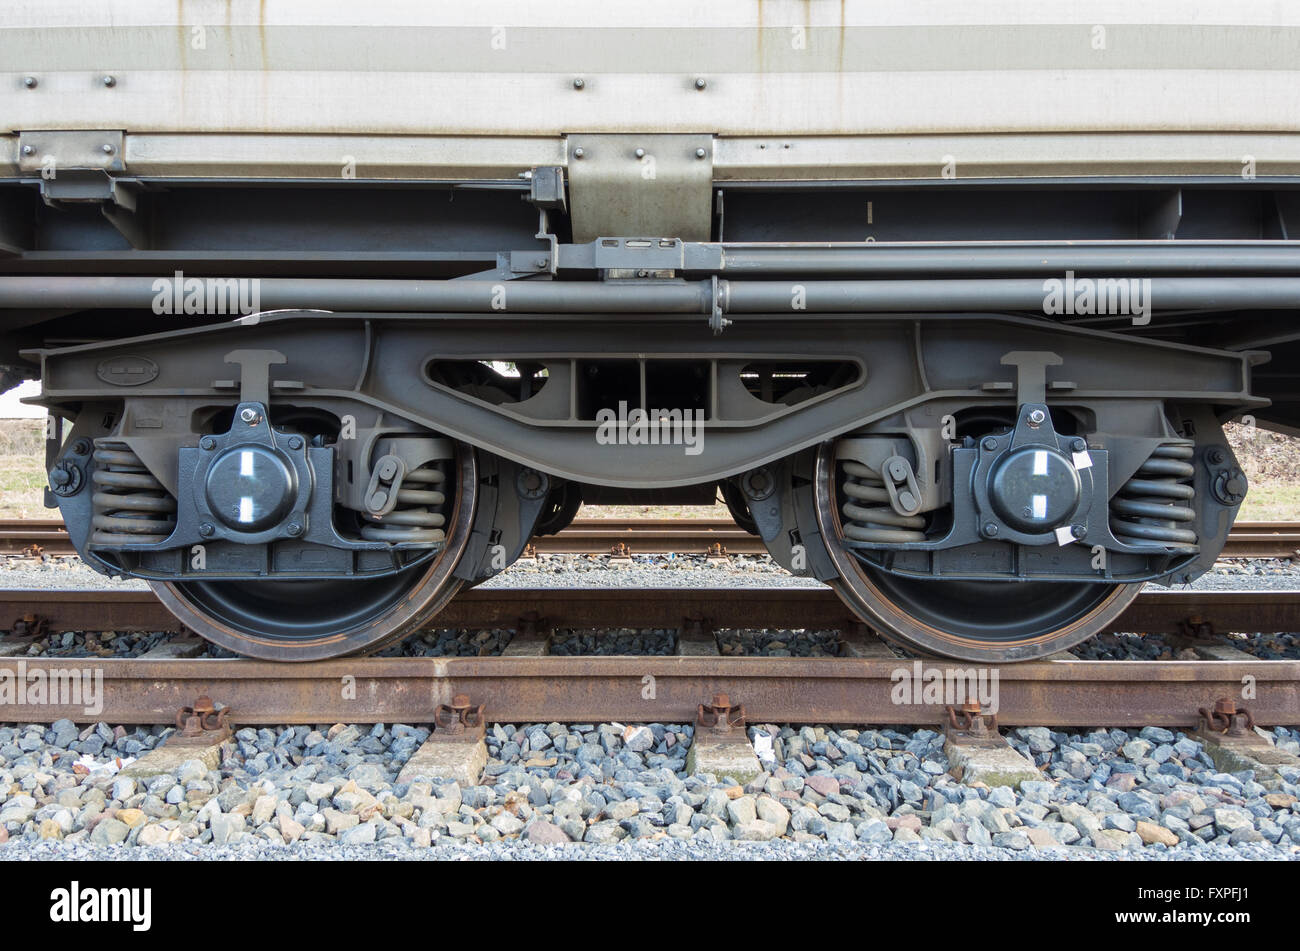 Bogie of a freight wagon with frame, coil springs, wheels and axle bearings Stock Photo